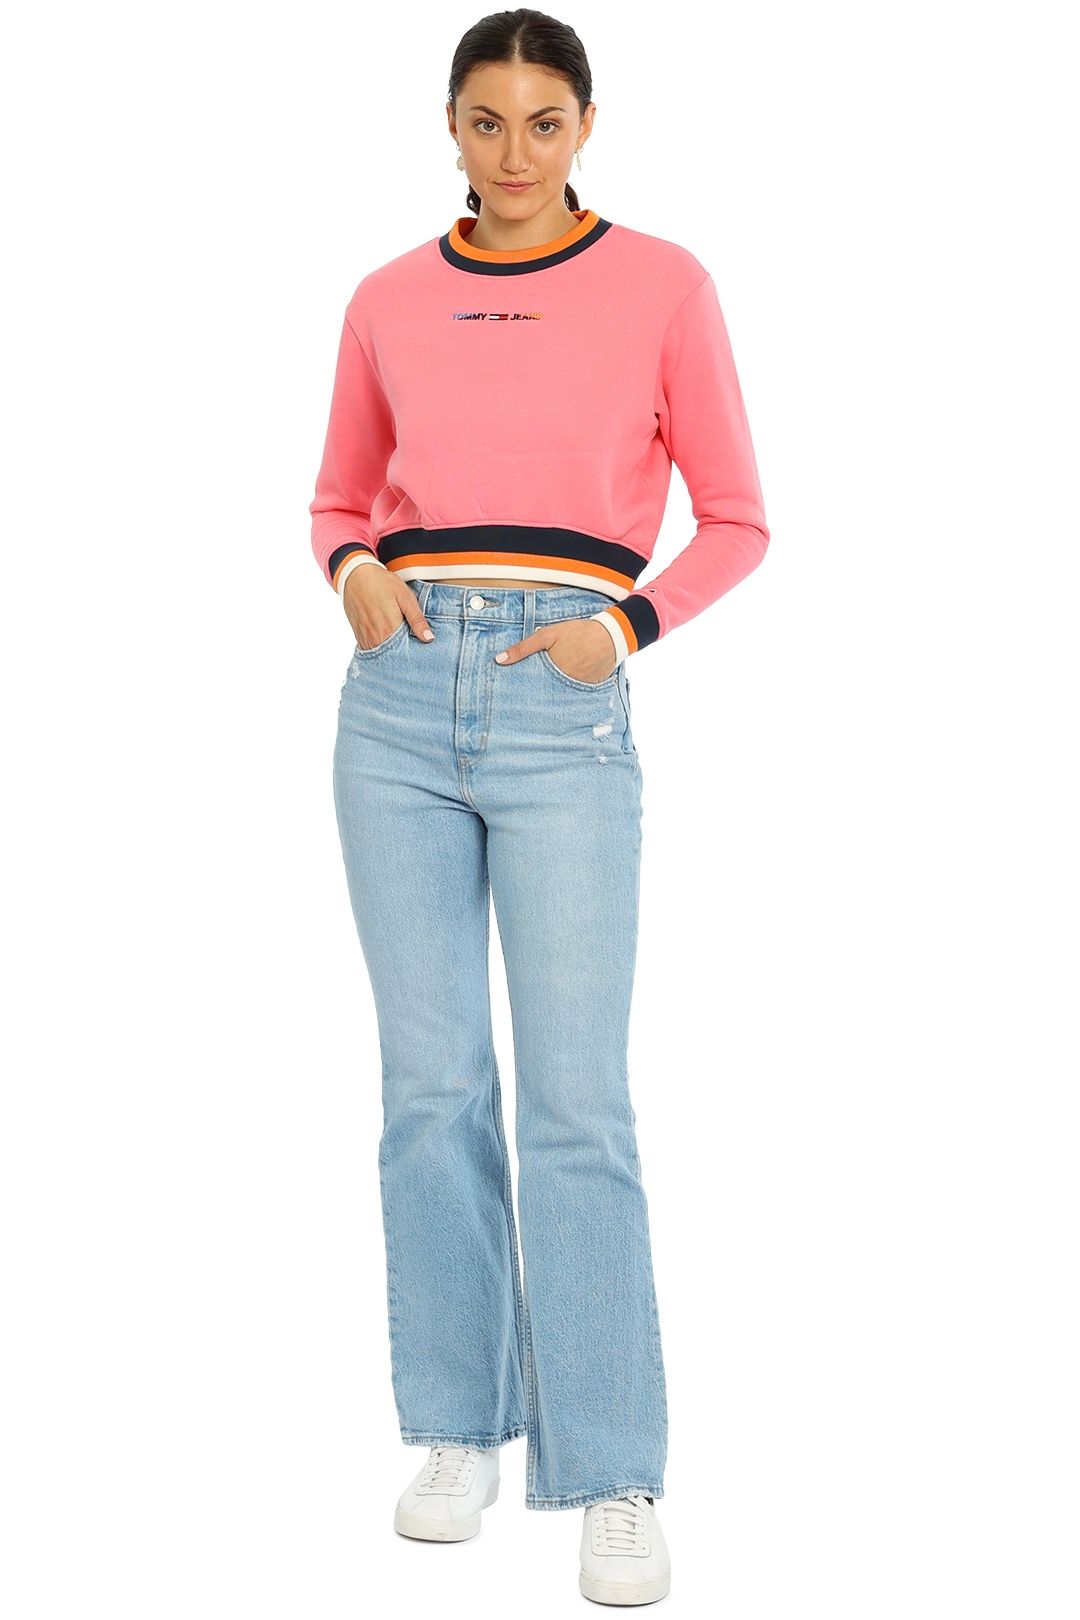 Tommy Hilfiger Tipping Crew Pink